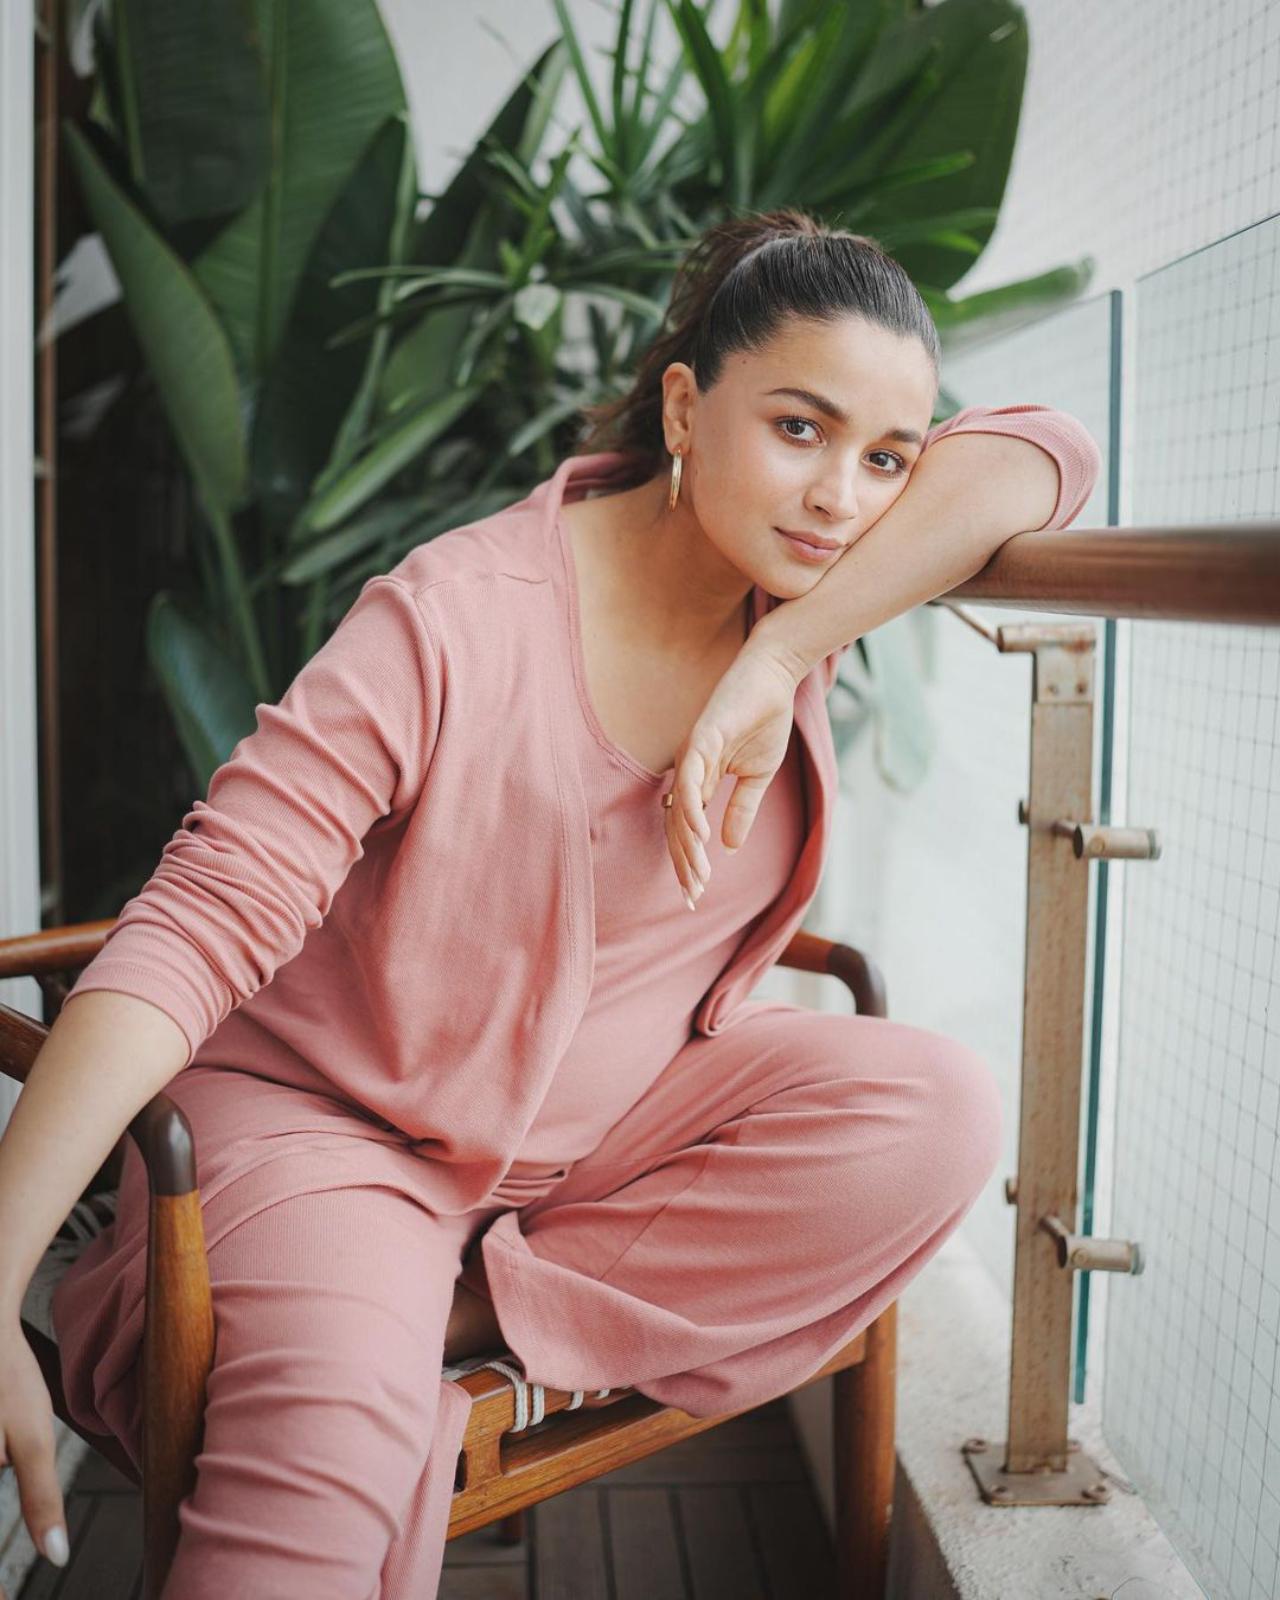 The maternity wear line will be lauched on October 14 under Alia's clothing brand, Edamamma. The brand was started as children's clothes brand